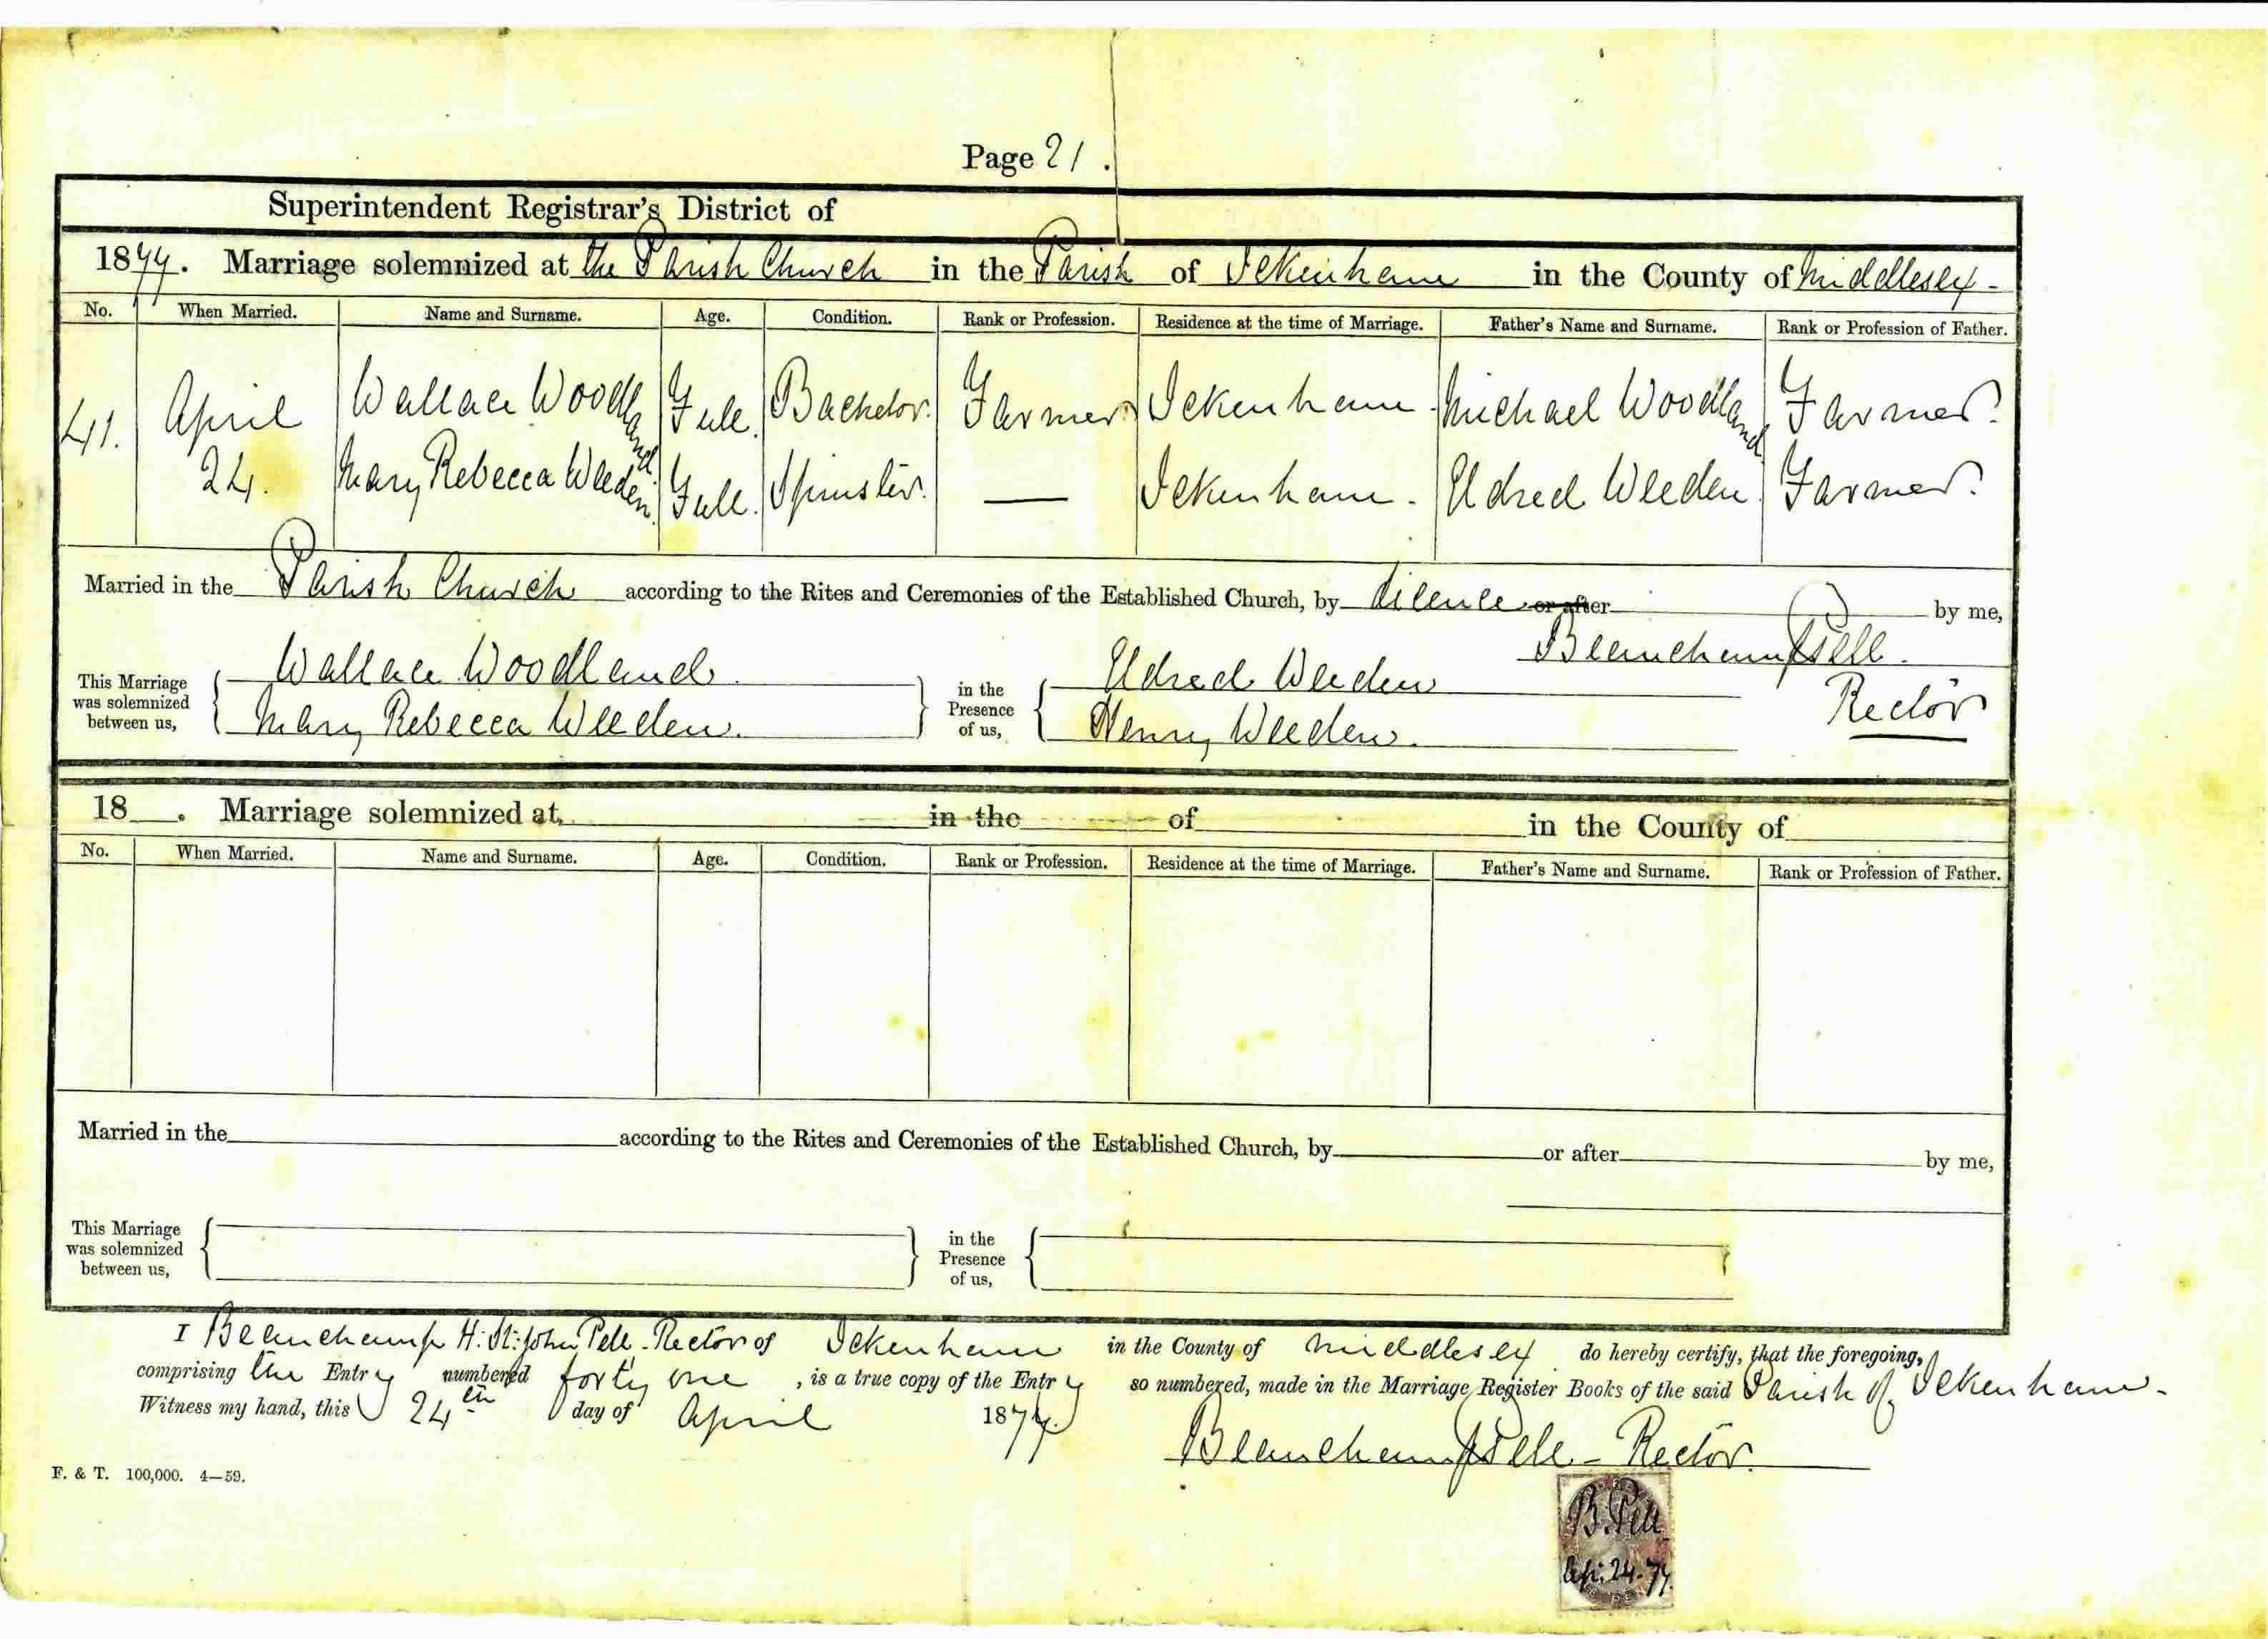 mariage certificate for Wallace Woodland and Mary Rebecca Weeden